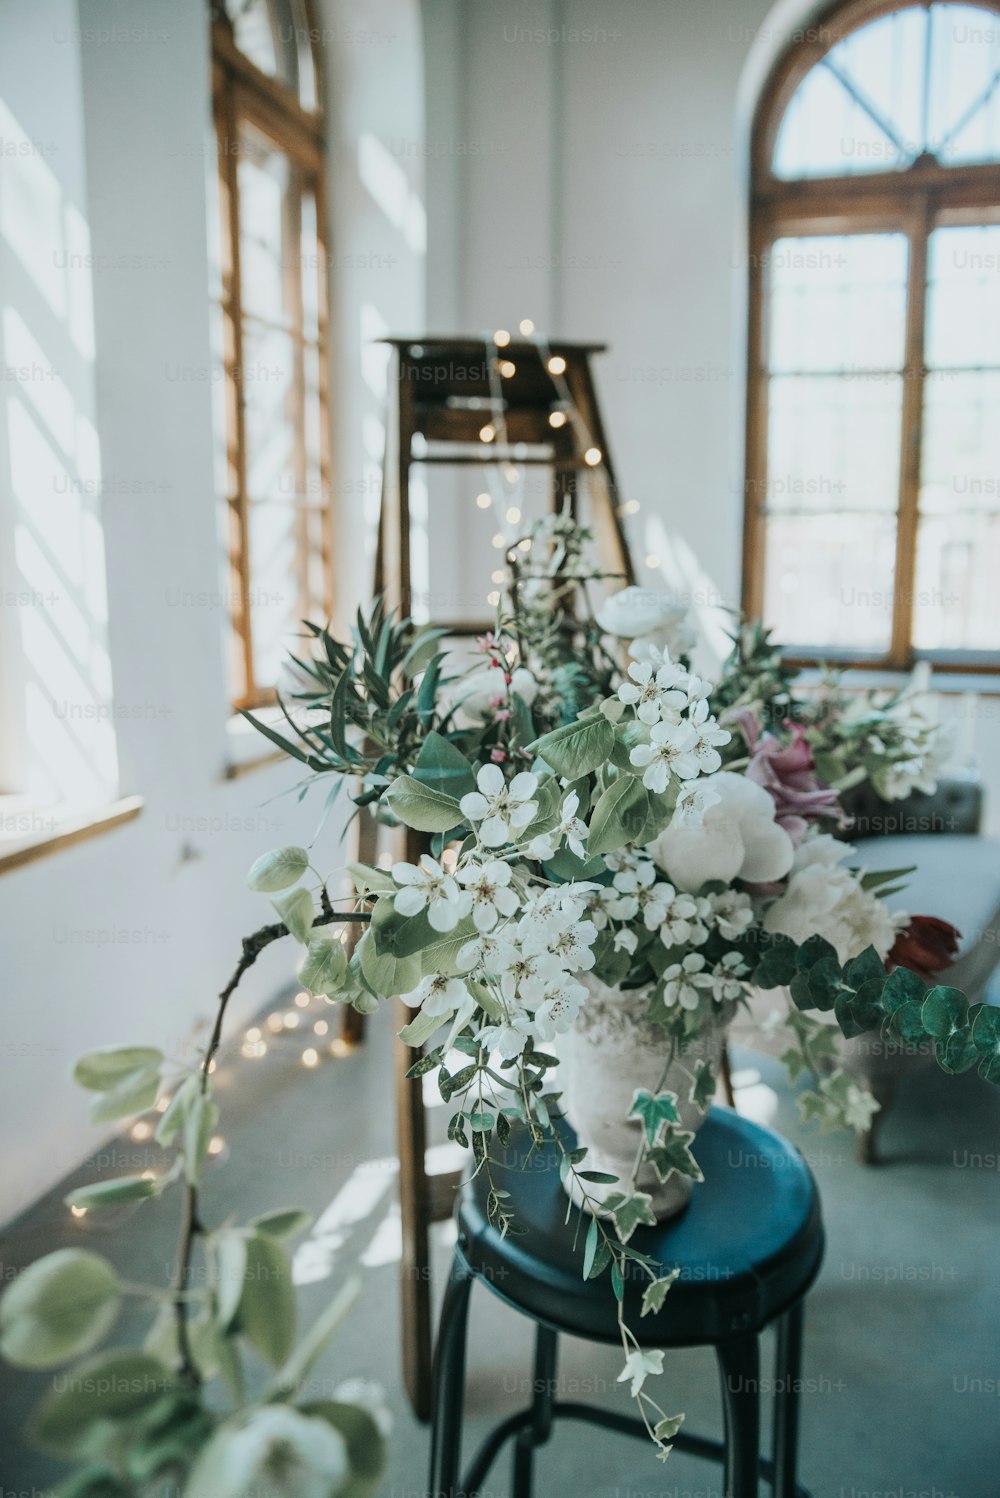 a vase filled with white flowers sitting on top of a blue stool